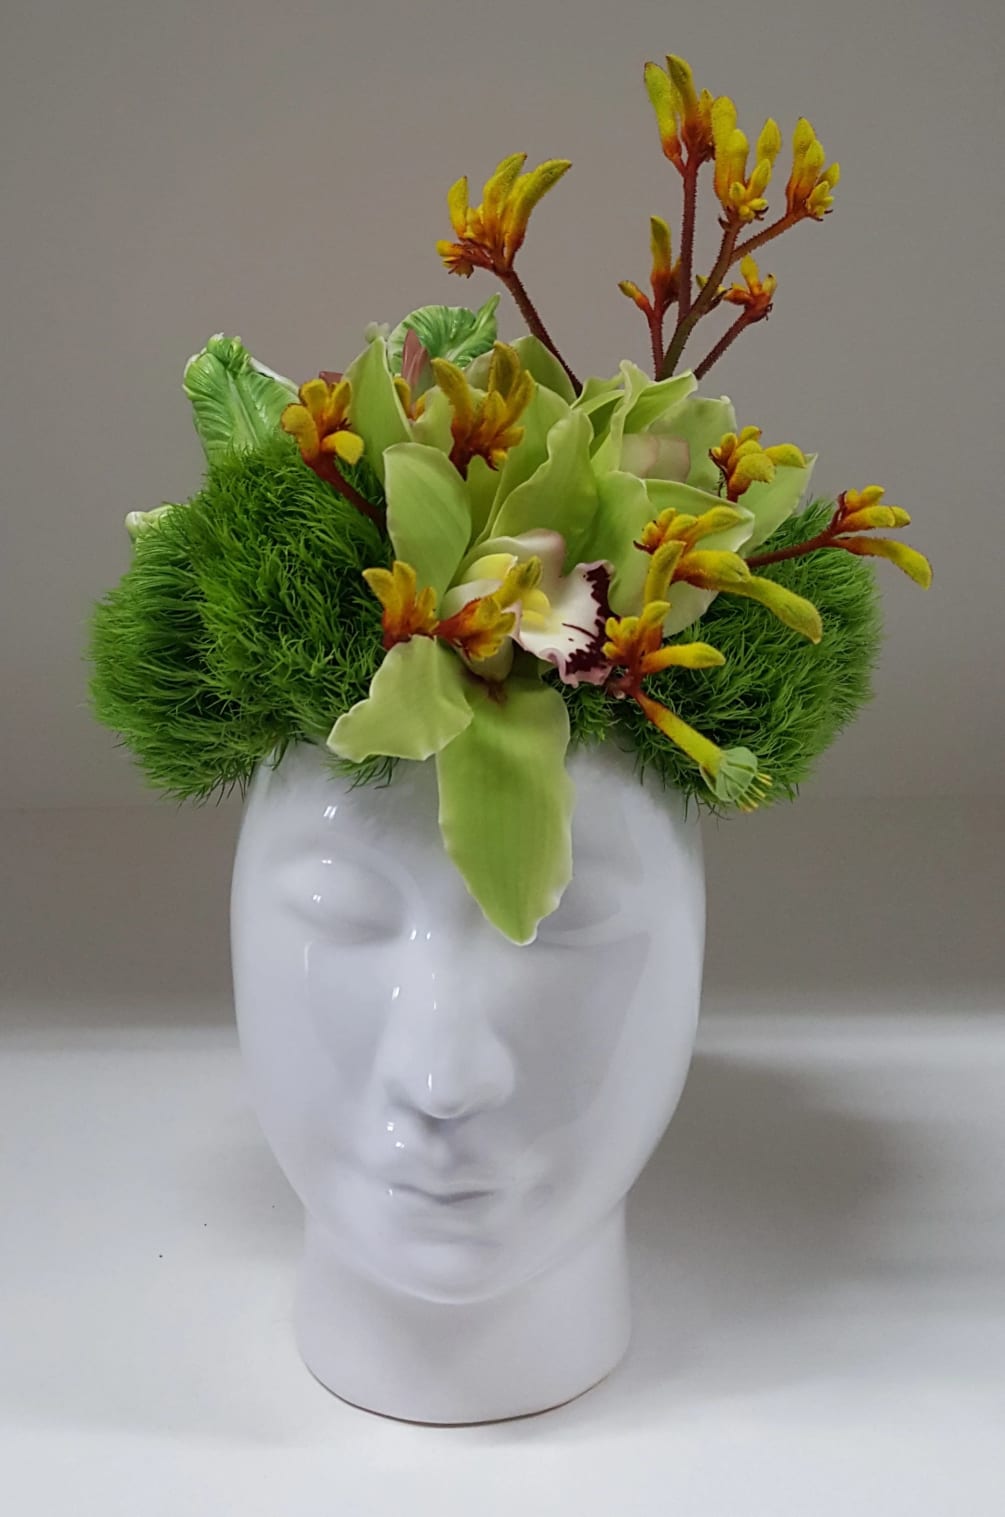 A modern design using green dianthus, orchids, kangaroo paw along with parrot